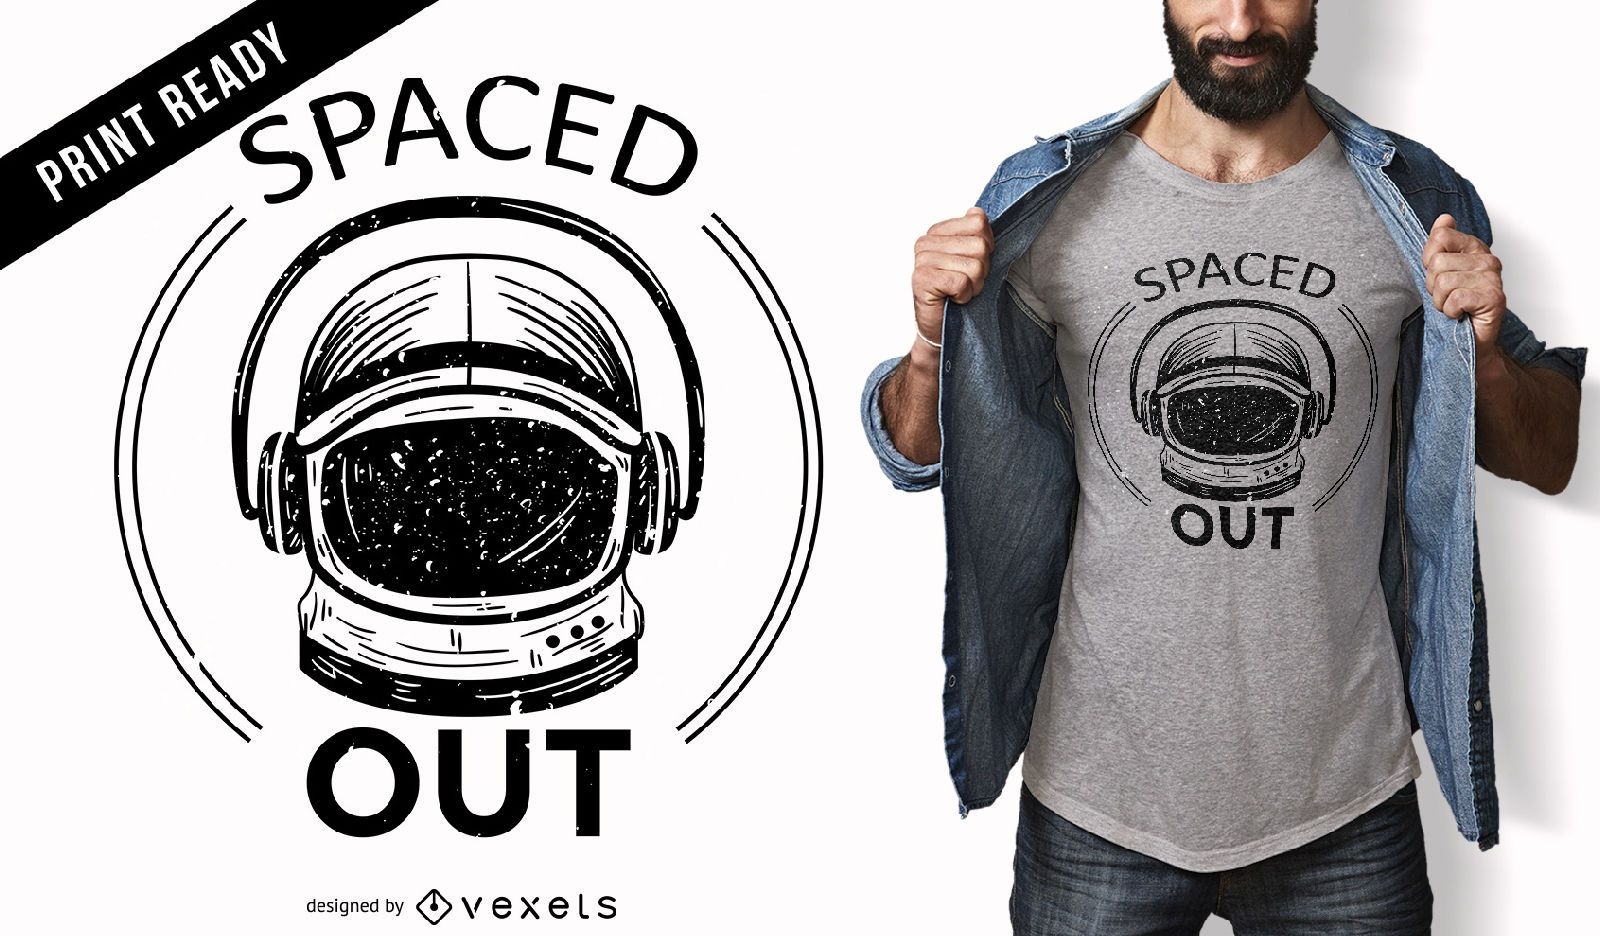 Spaced out t-shirt design